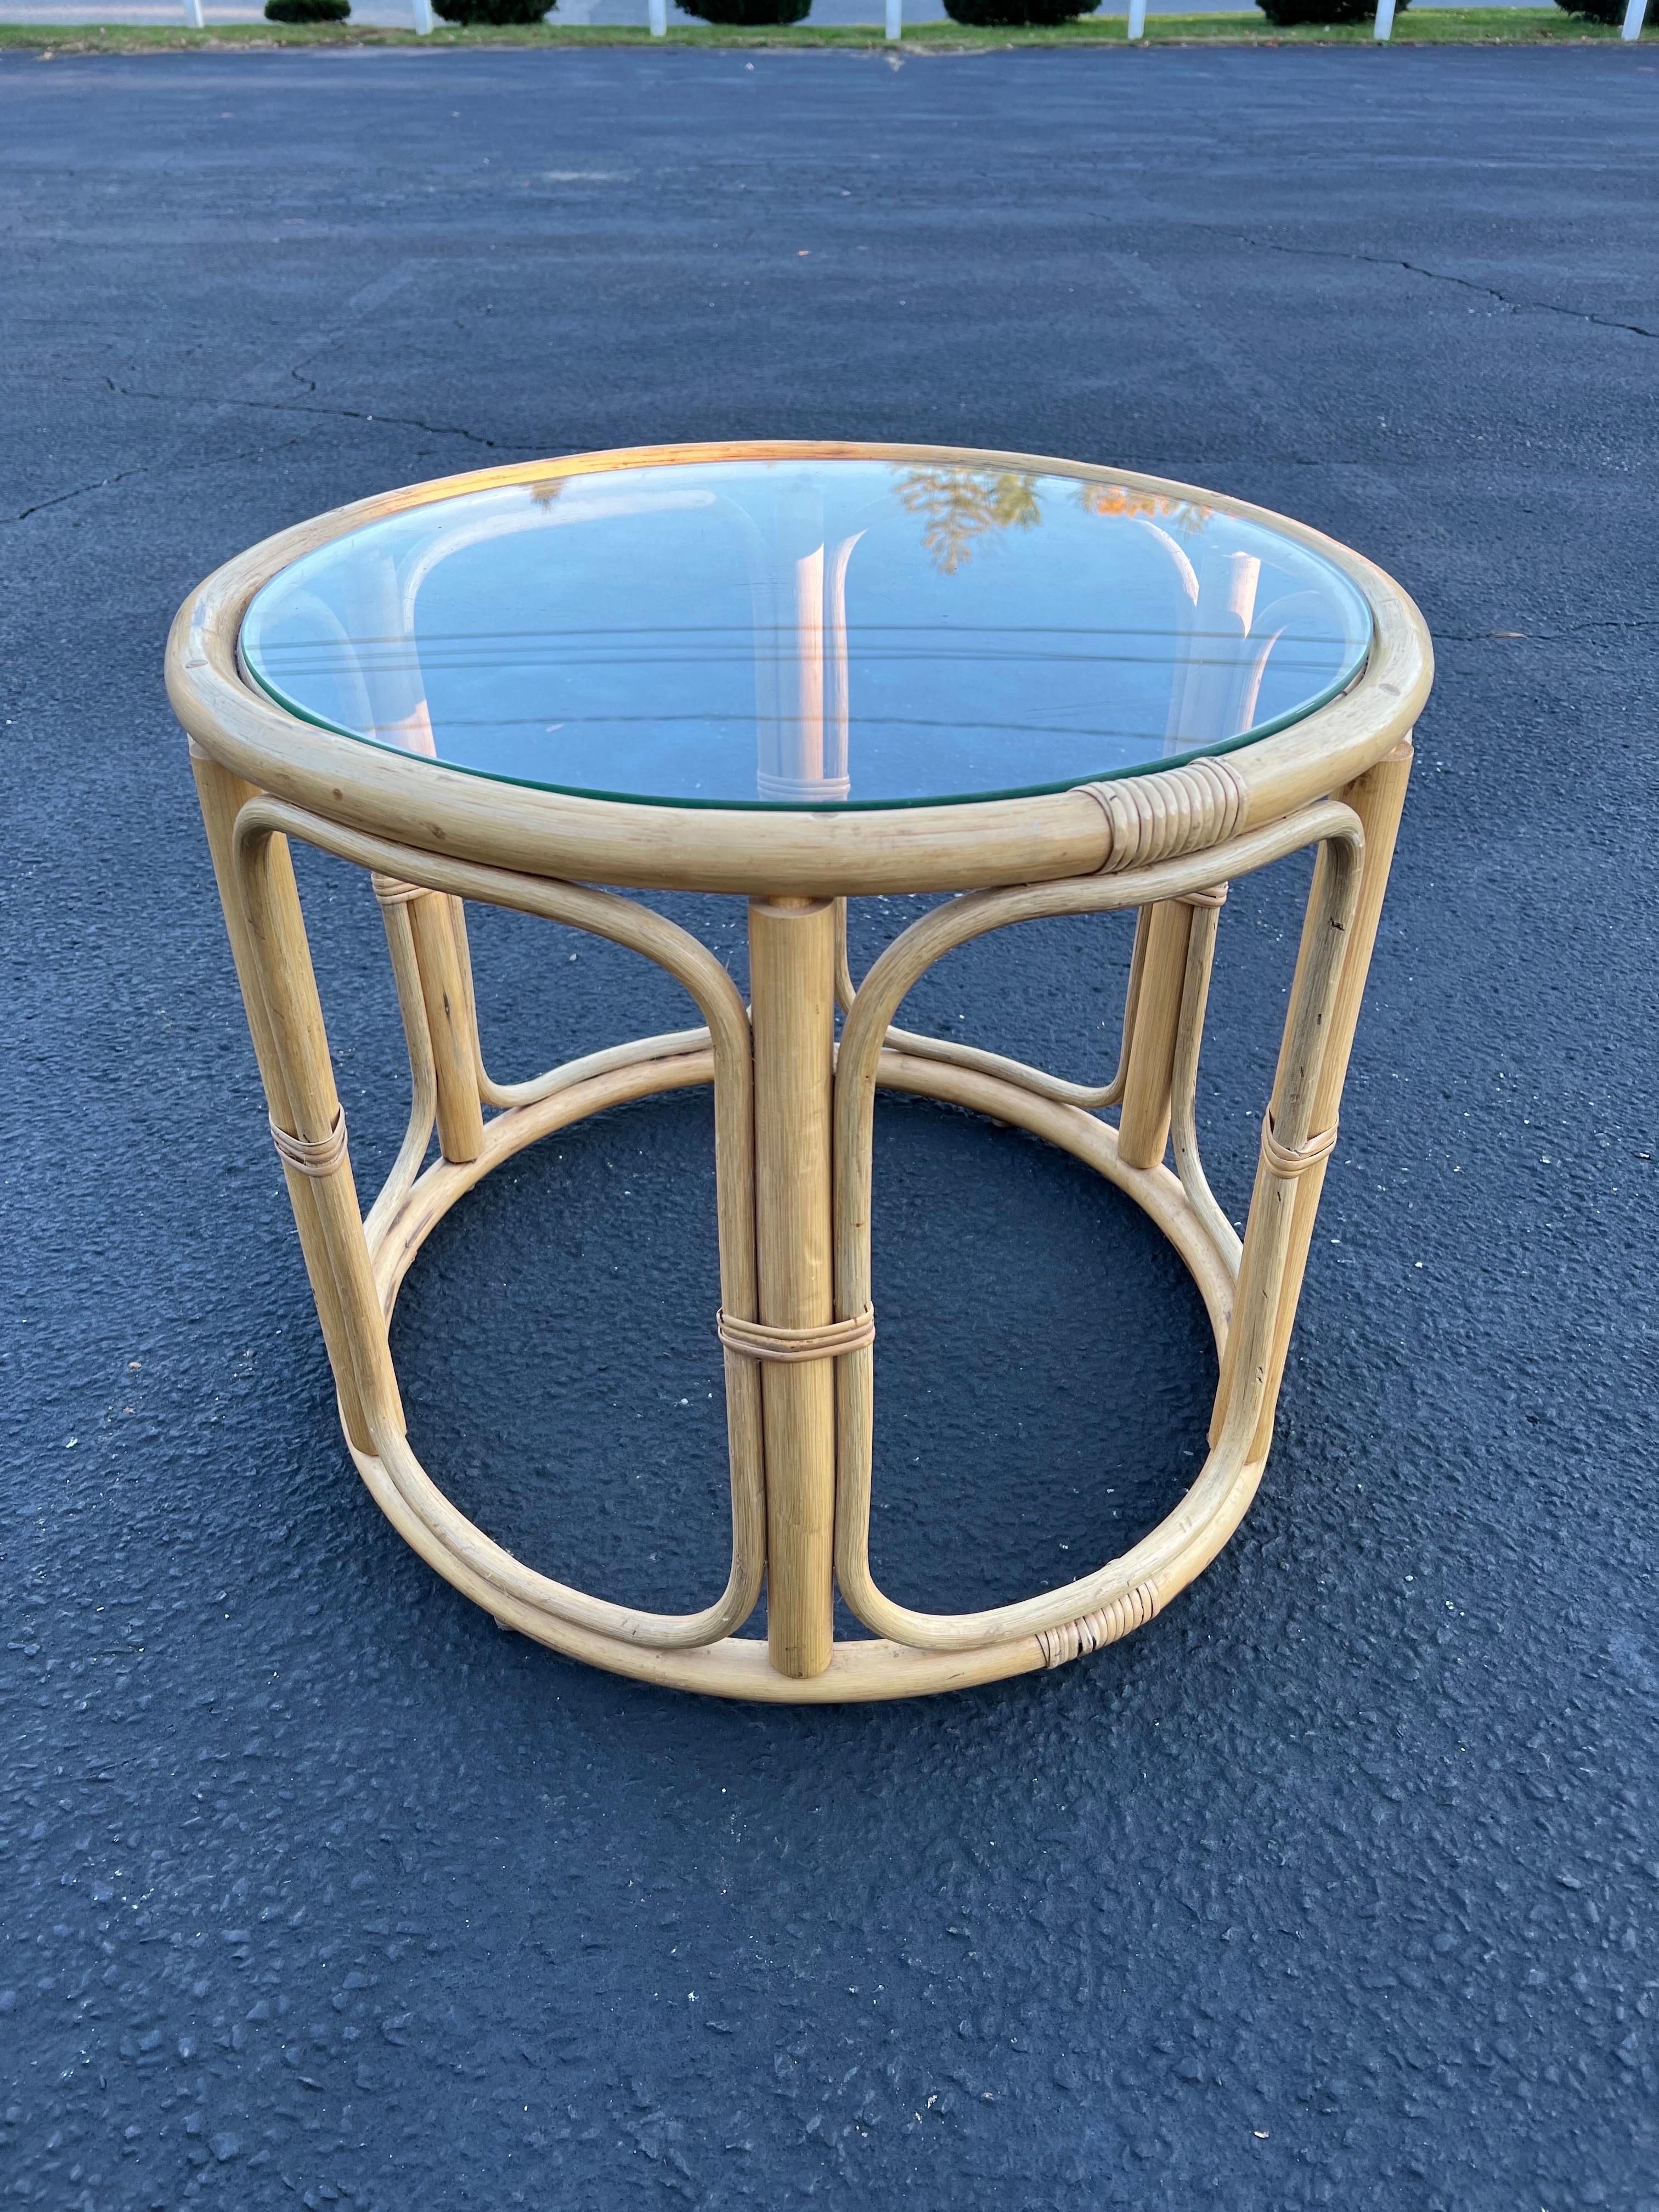 Round rattan and faux bamboo side table. Classic boho style table. Simple, organic design. We have a matching pair of rattan swivel chairs to flank this lovely table
 